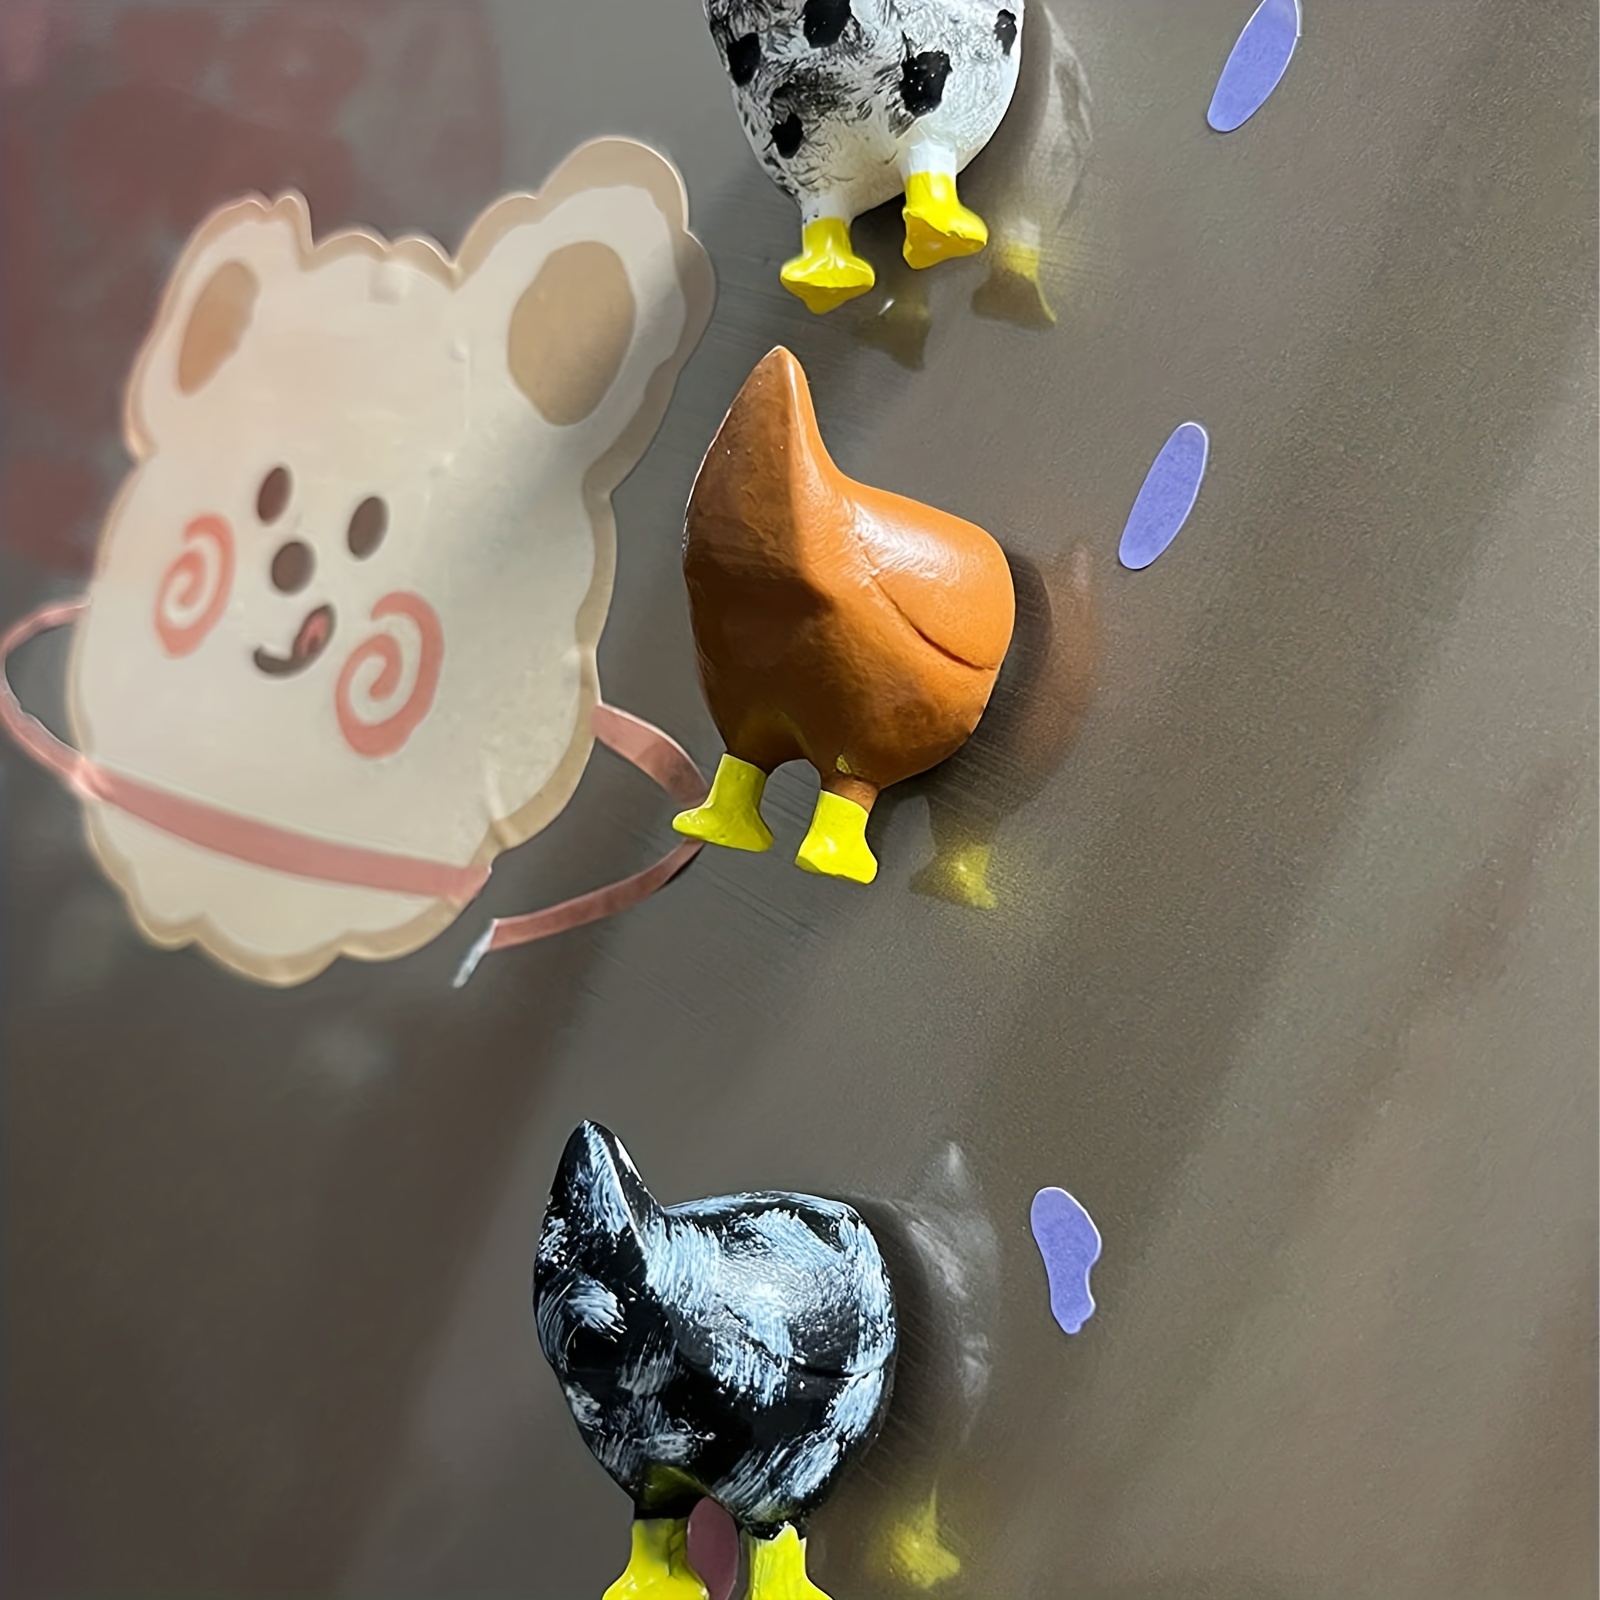 Buy 6 Pack Chicken Butt Magnets for Refrigerator - Magnetic Decorative  Chicken Butt - Refrigerator Animal Magnet - Chicken Home Decor - Prank  Funny Chicken Butt Gift Online at Low Prices in India 